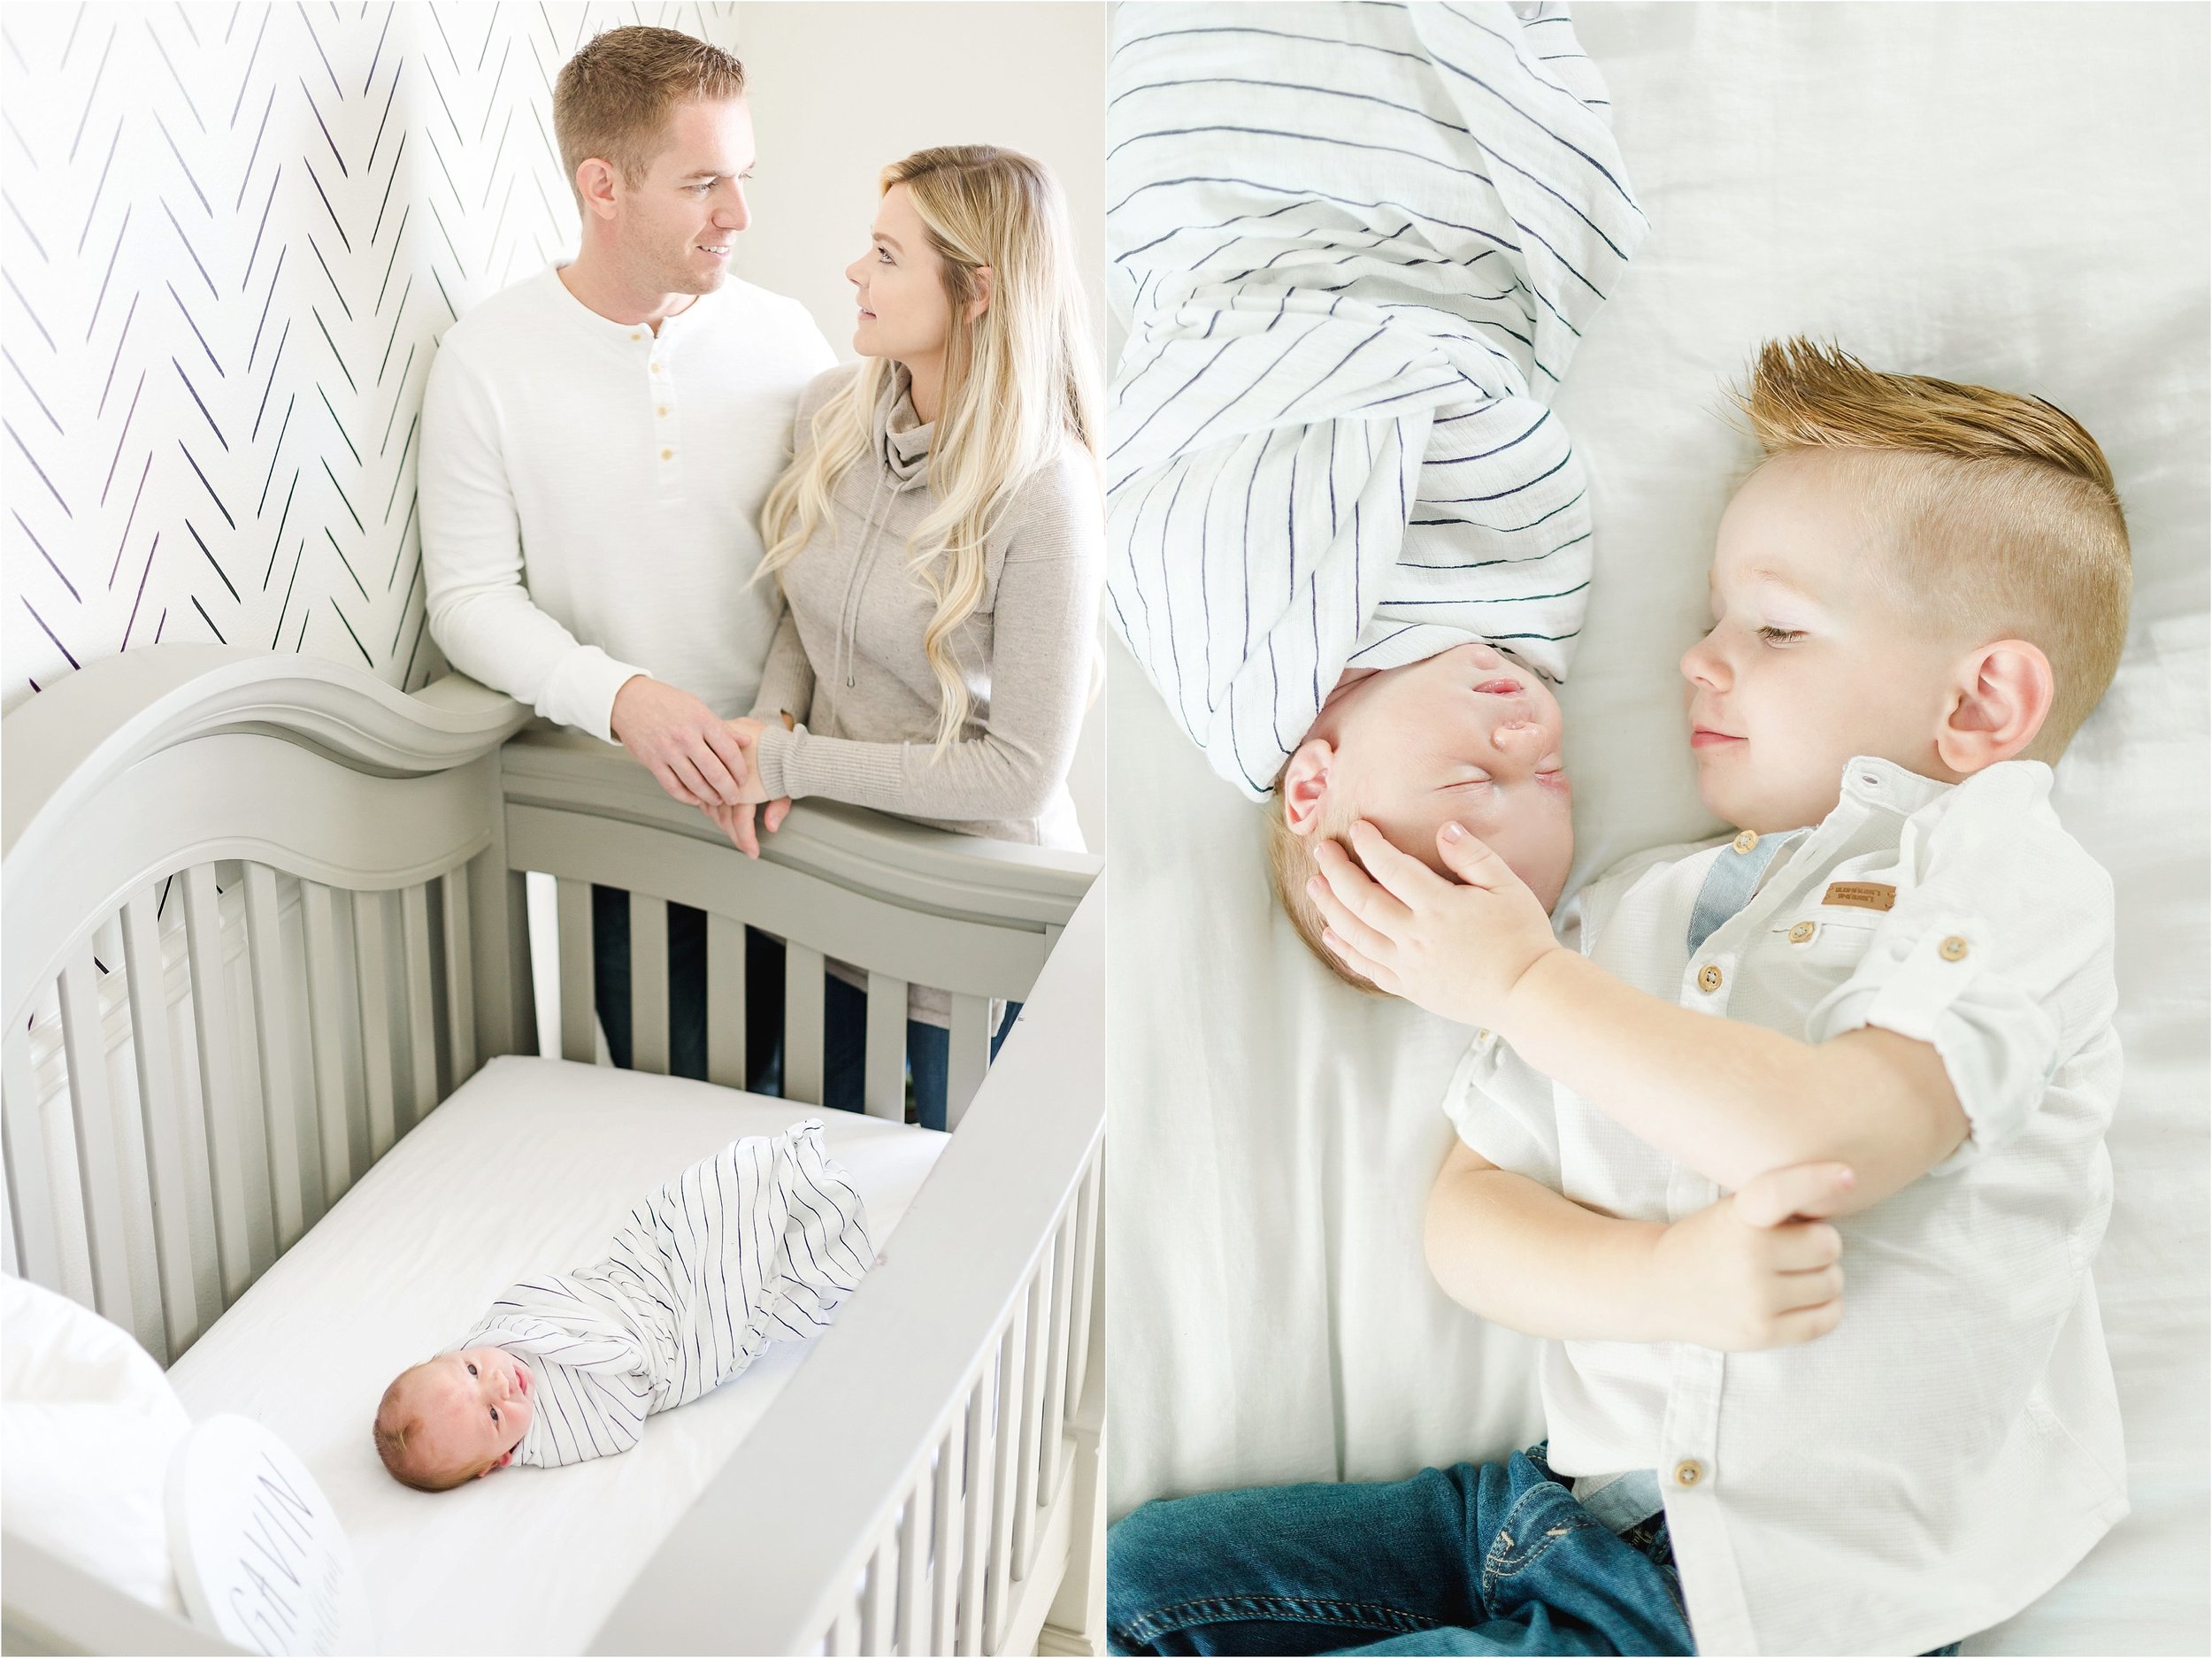 Image on the left shows baby boy lies in his crib while his parents hold hands and smile at each other.  Image on the right shows brothers lying on the bed looking at each other as big brother gently places his hand on his brother's head.